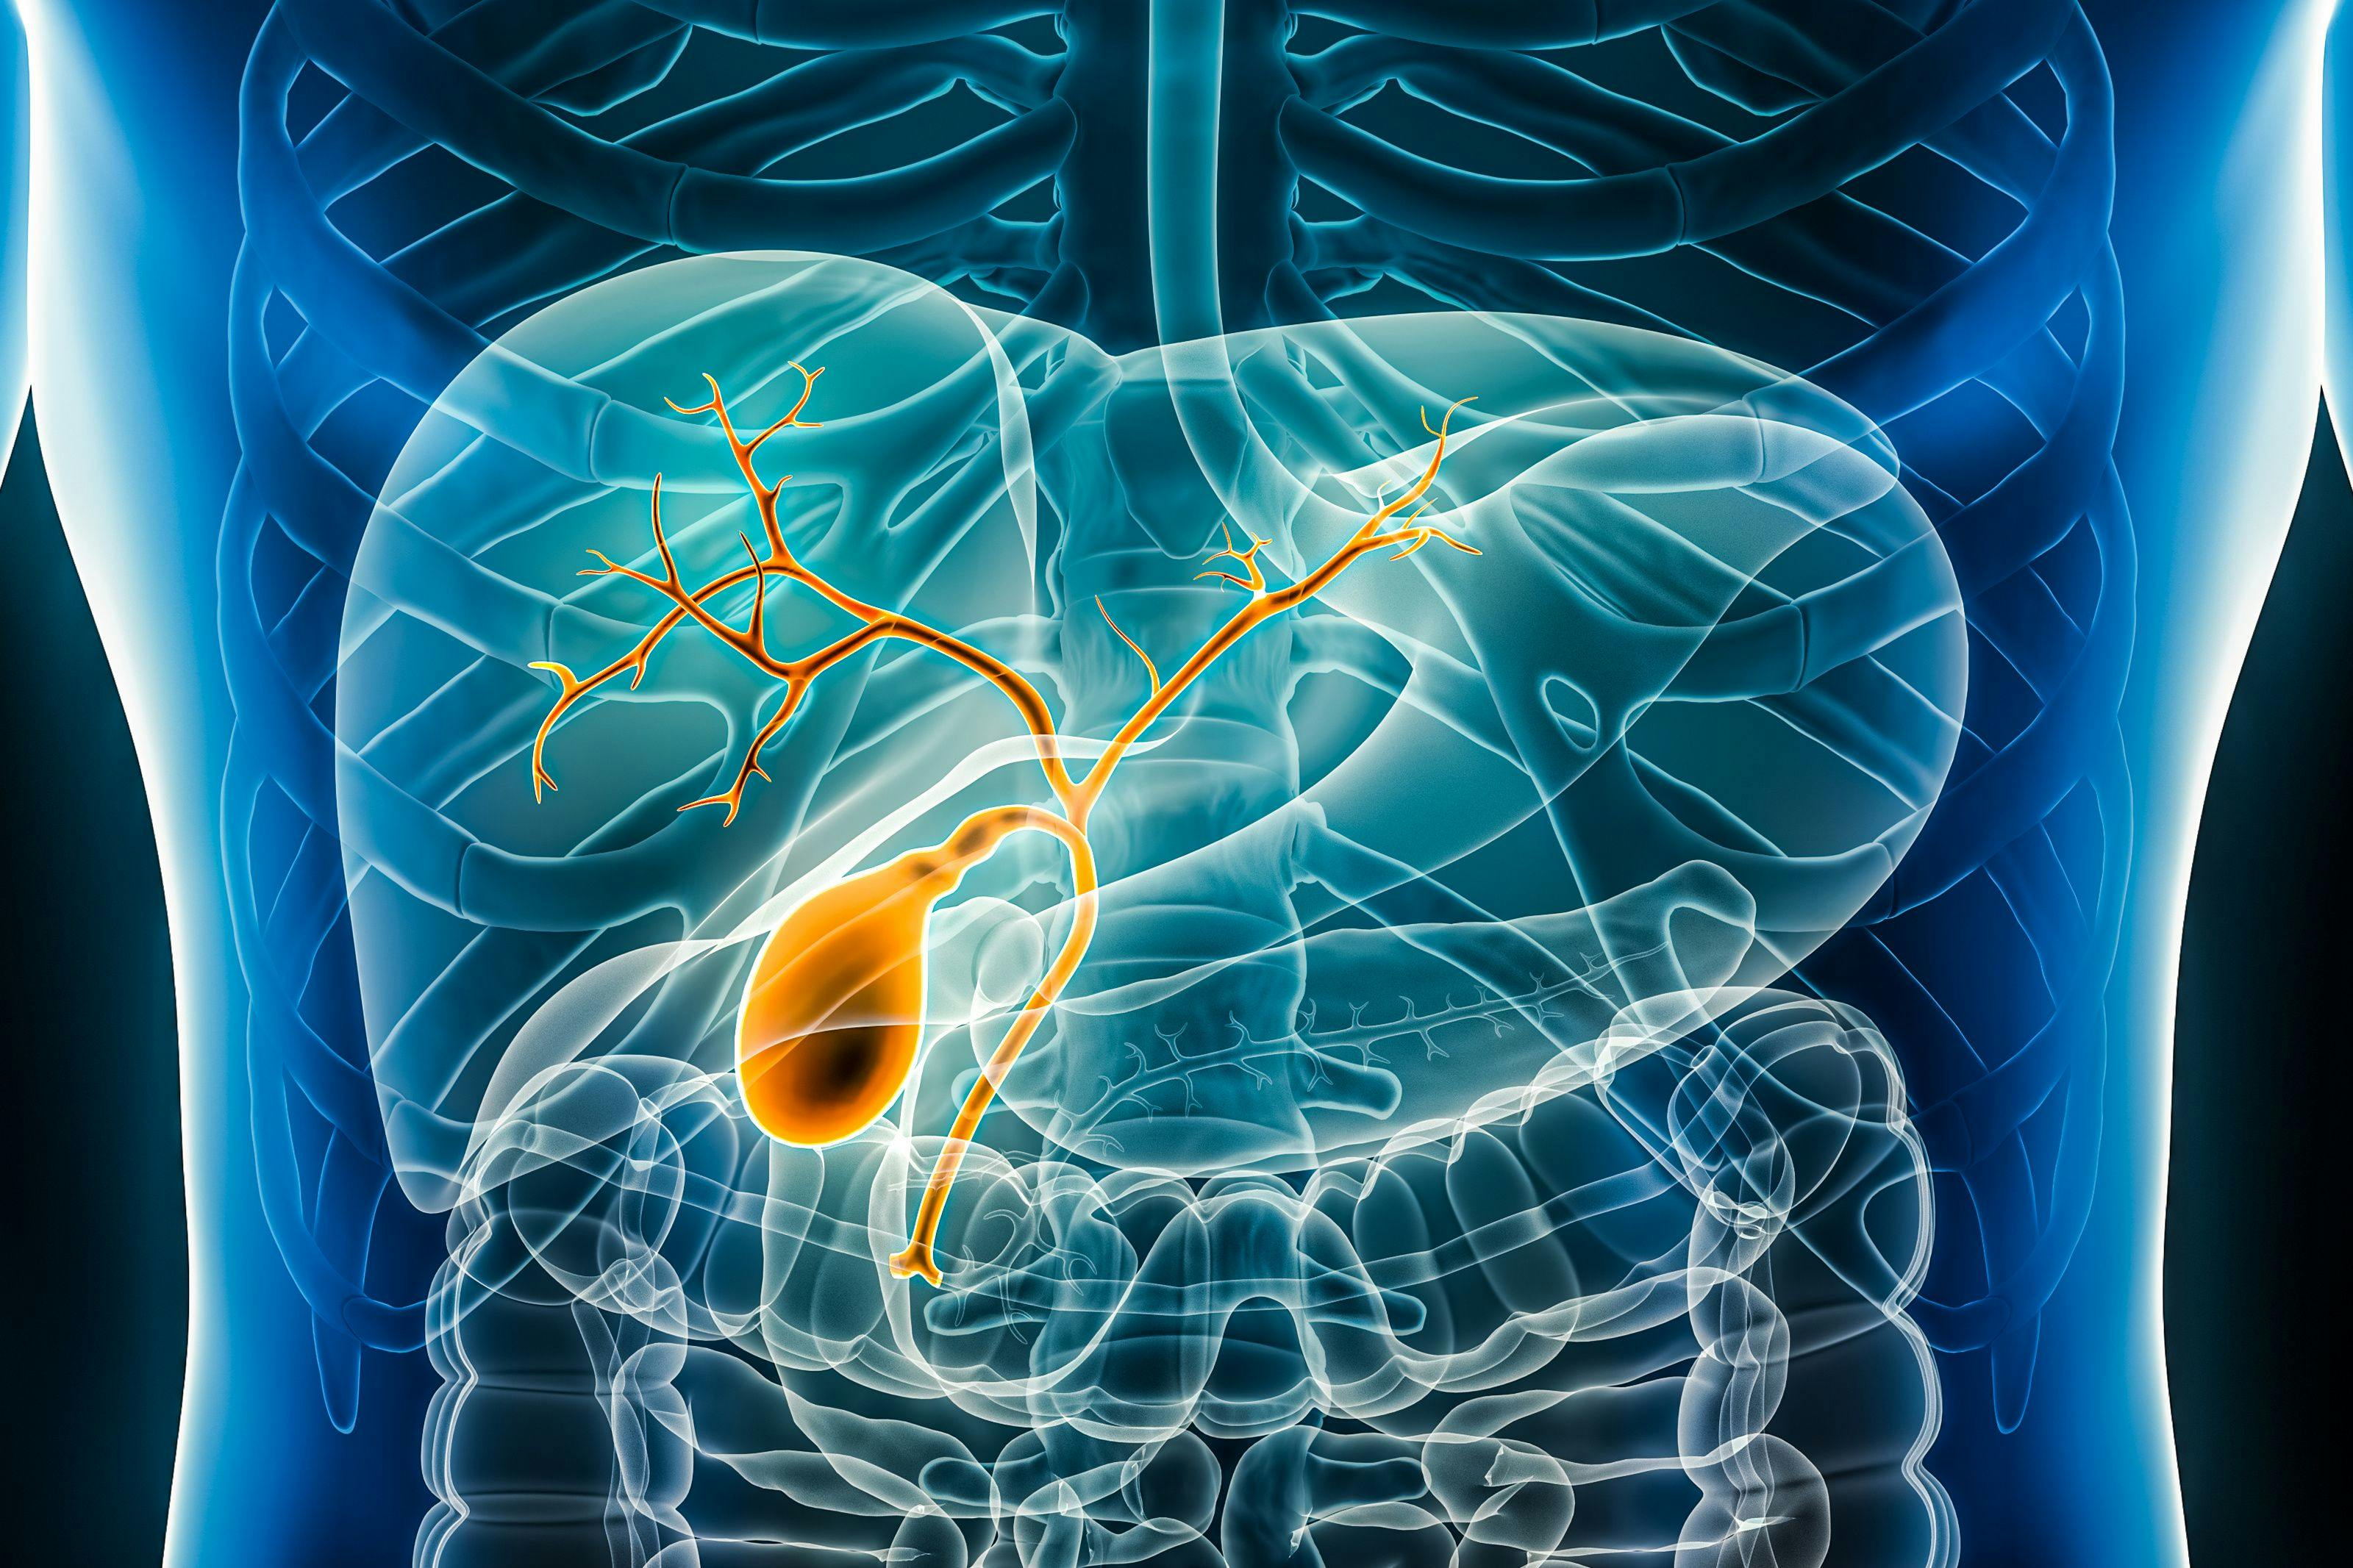 Biliary tract in gi tract | Image Credit: © Matthieu - www.stock.adobe.com